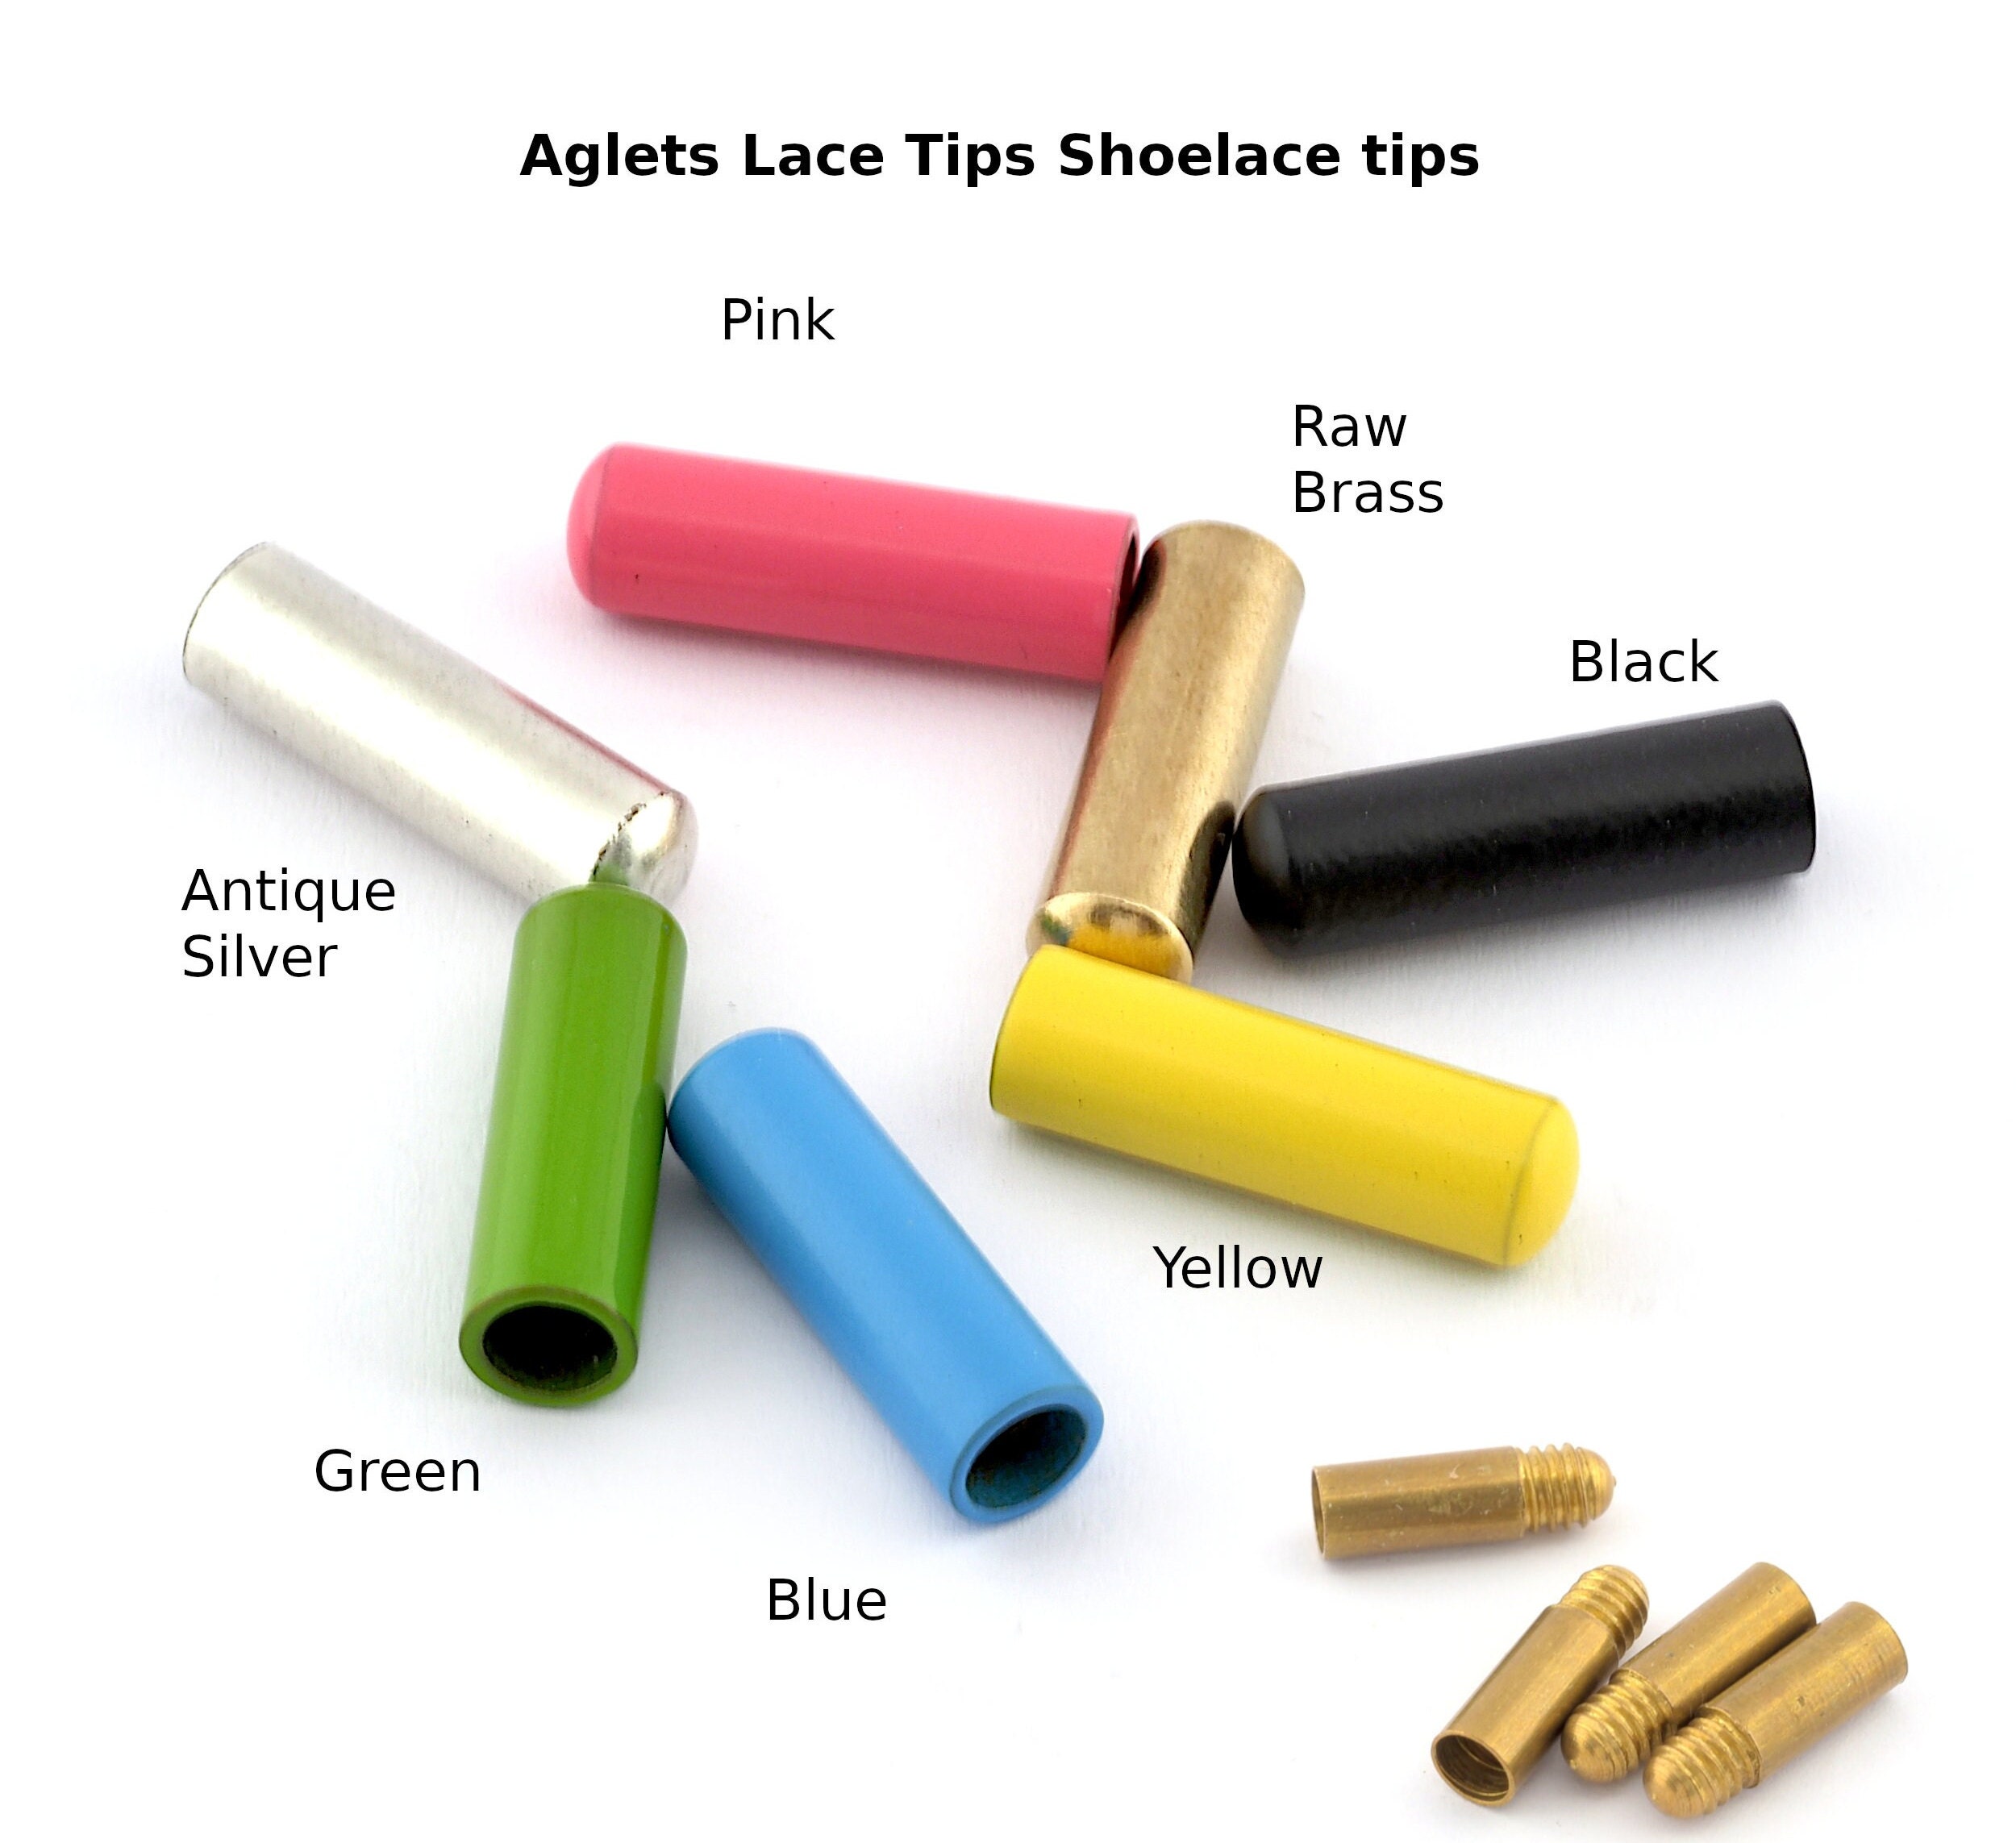 Tipping your Laces: Aglets, Shrink Tips & More